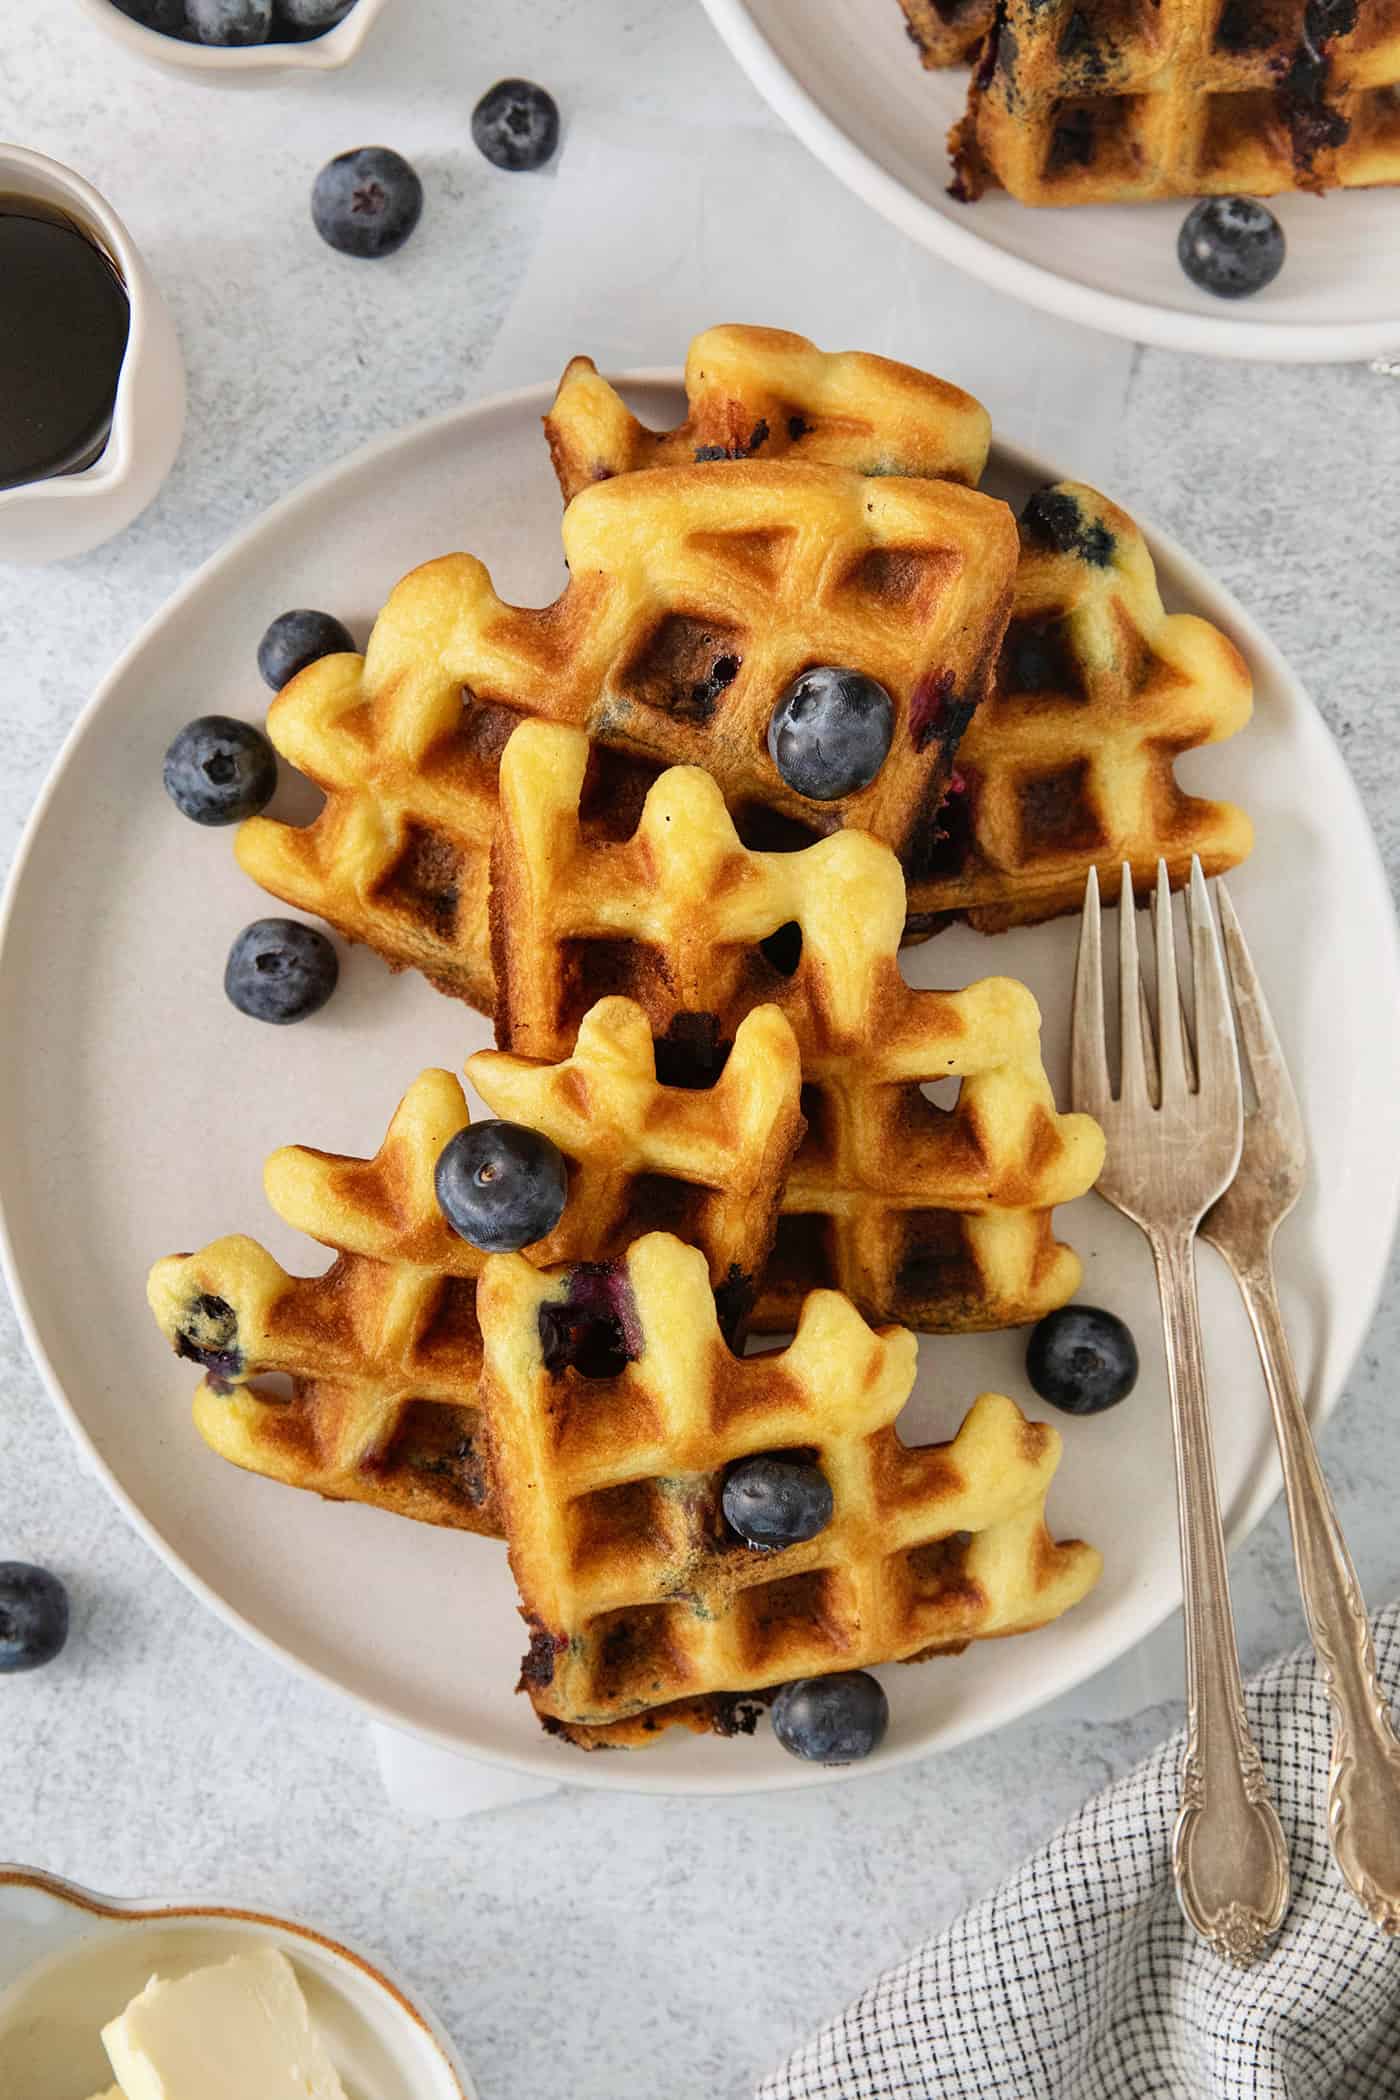 Blueberry waffles topped with blueberries are shown on a white plate with forks.